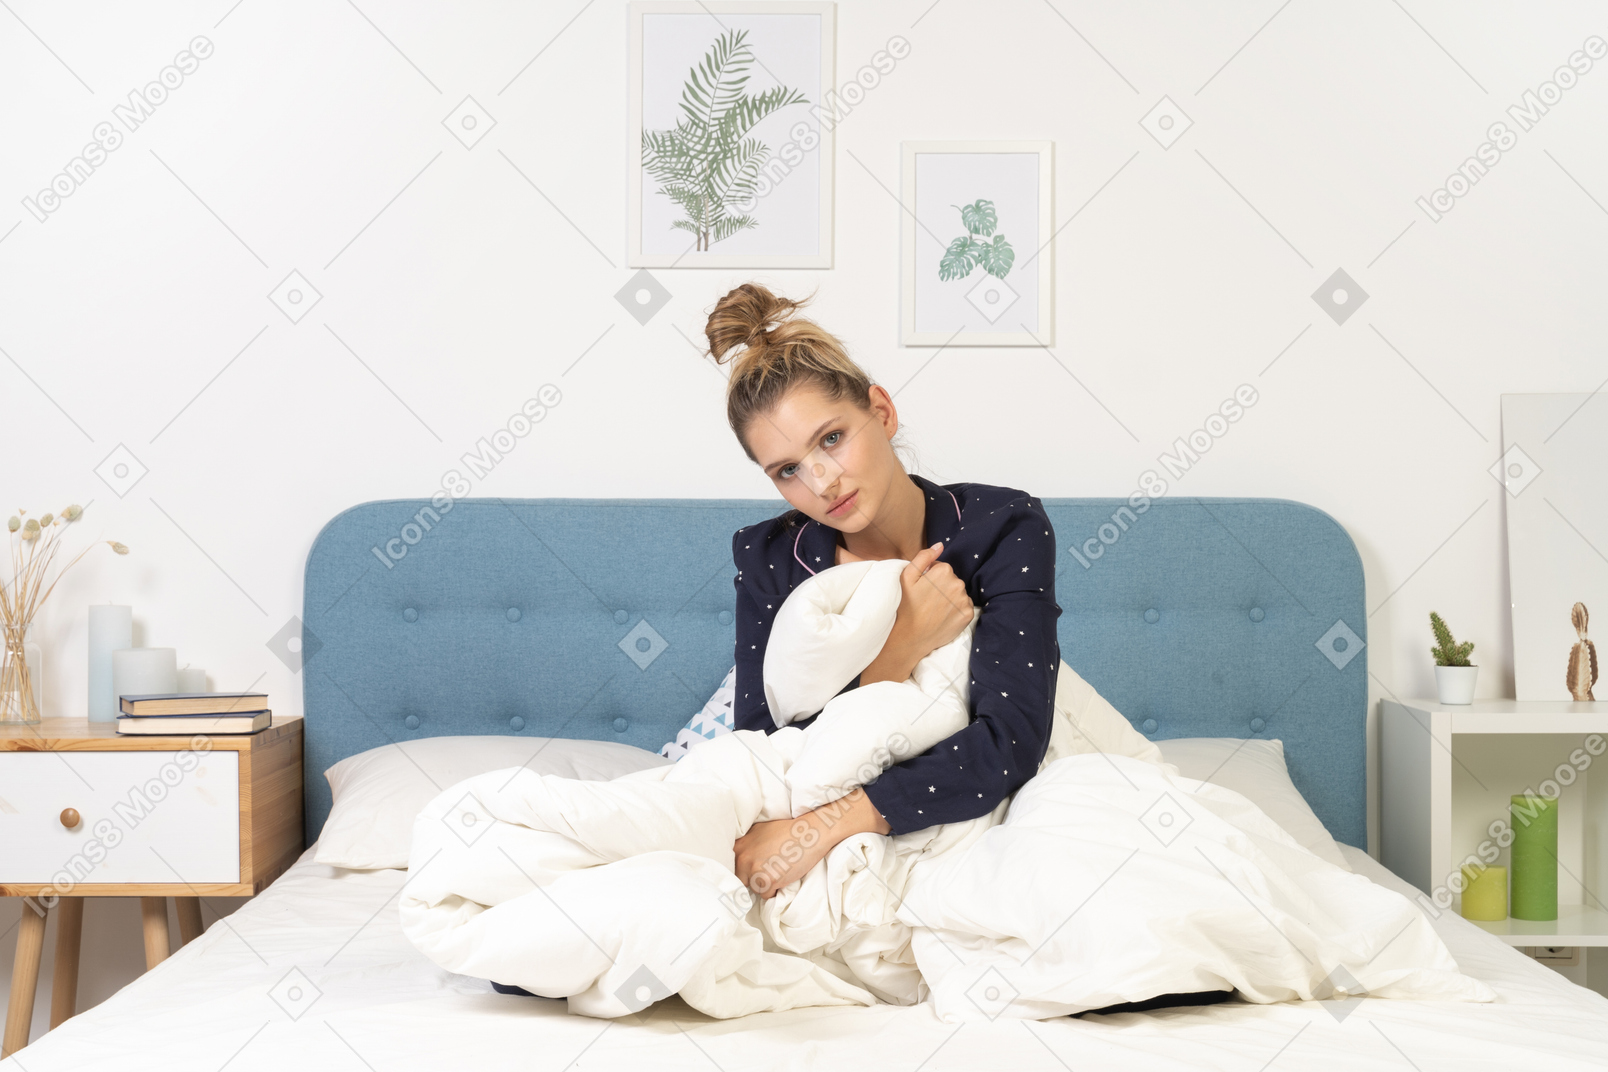 Front view of a tired young woman in pajamas with blanket staying in bed